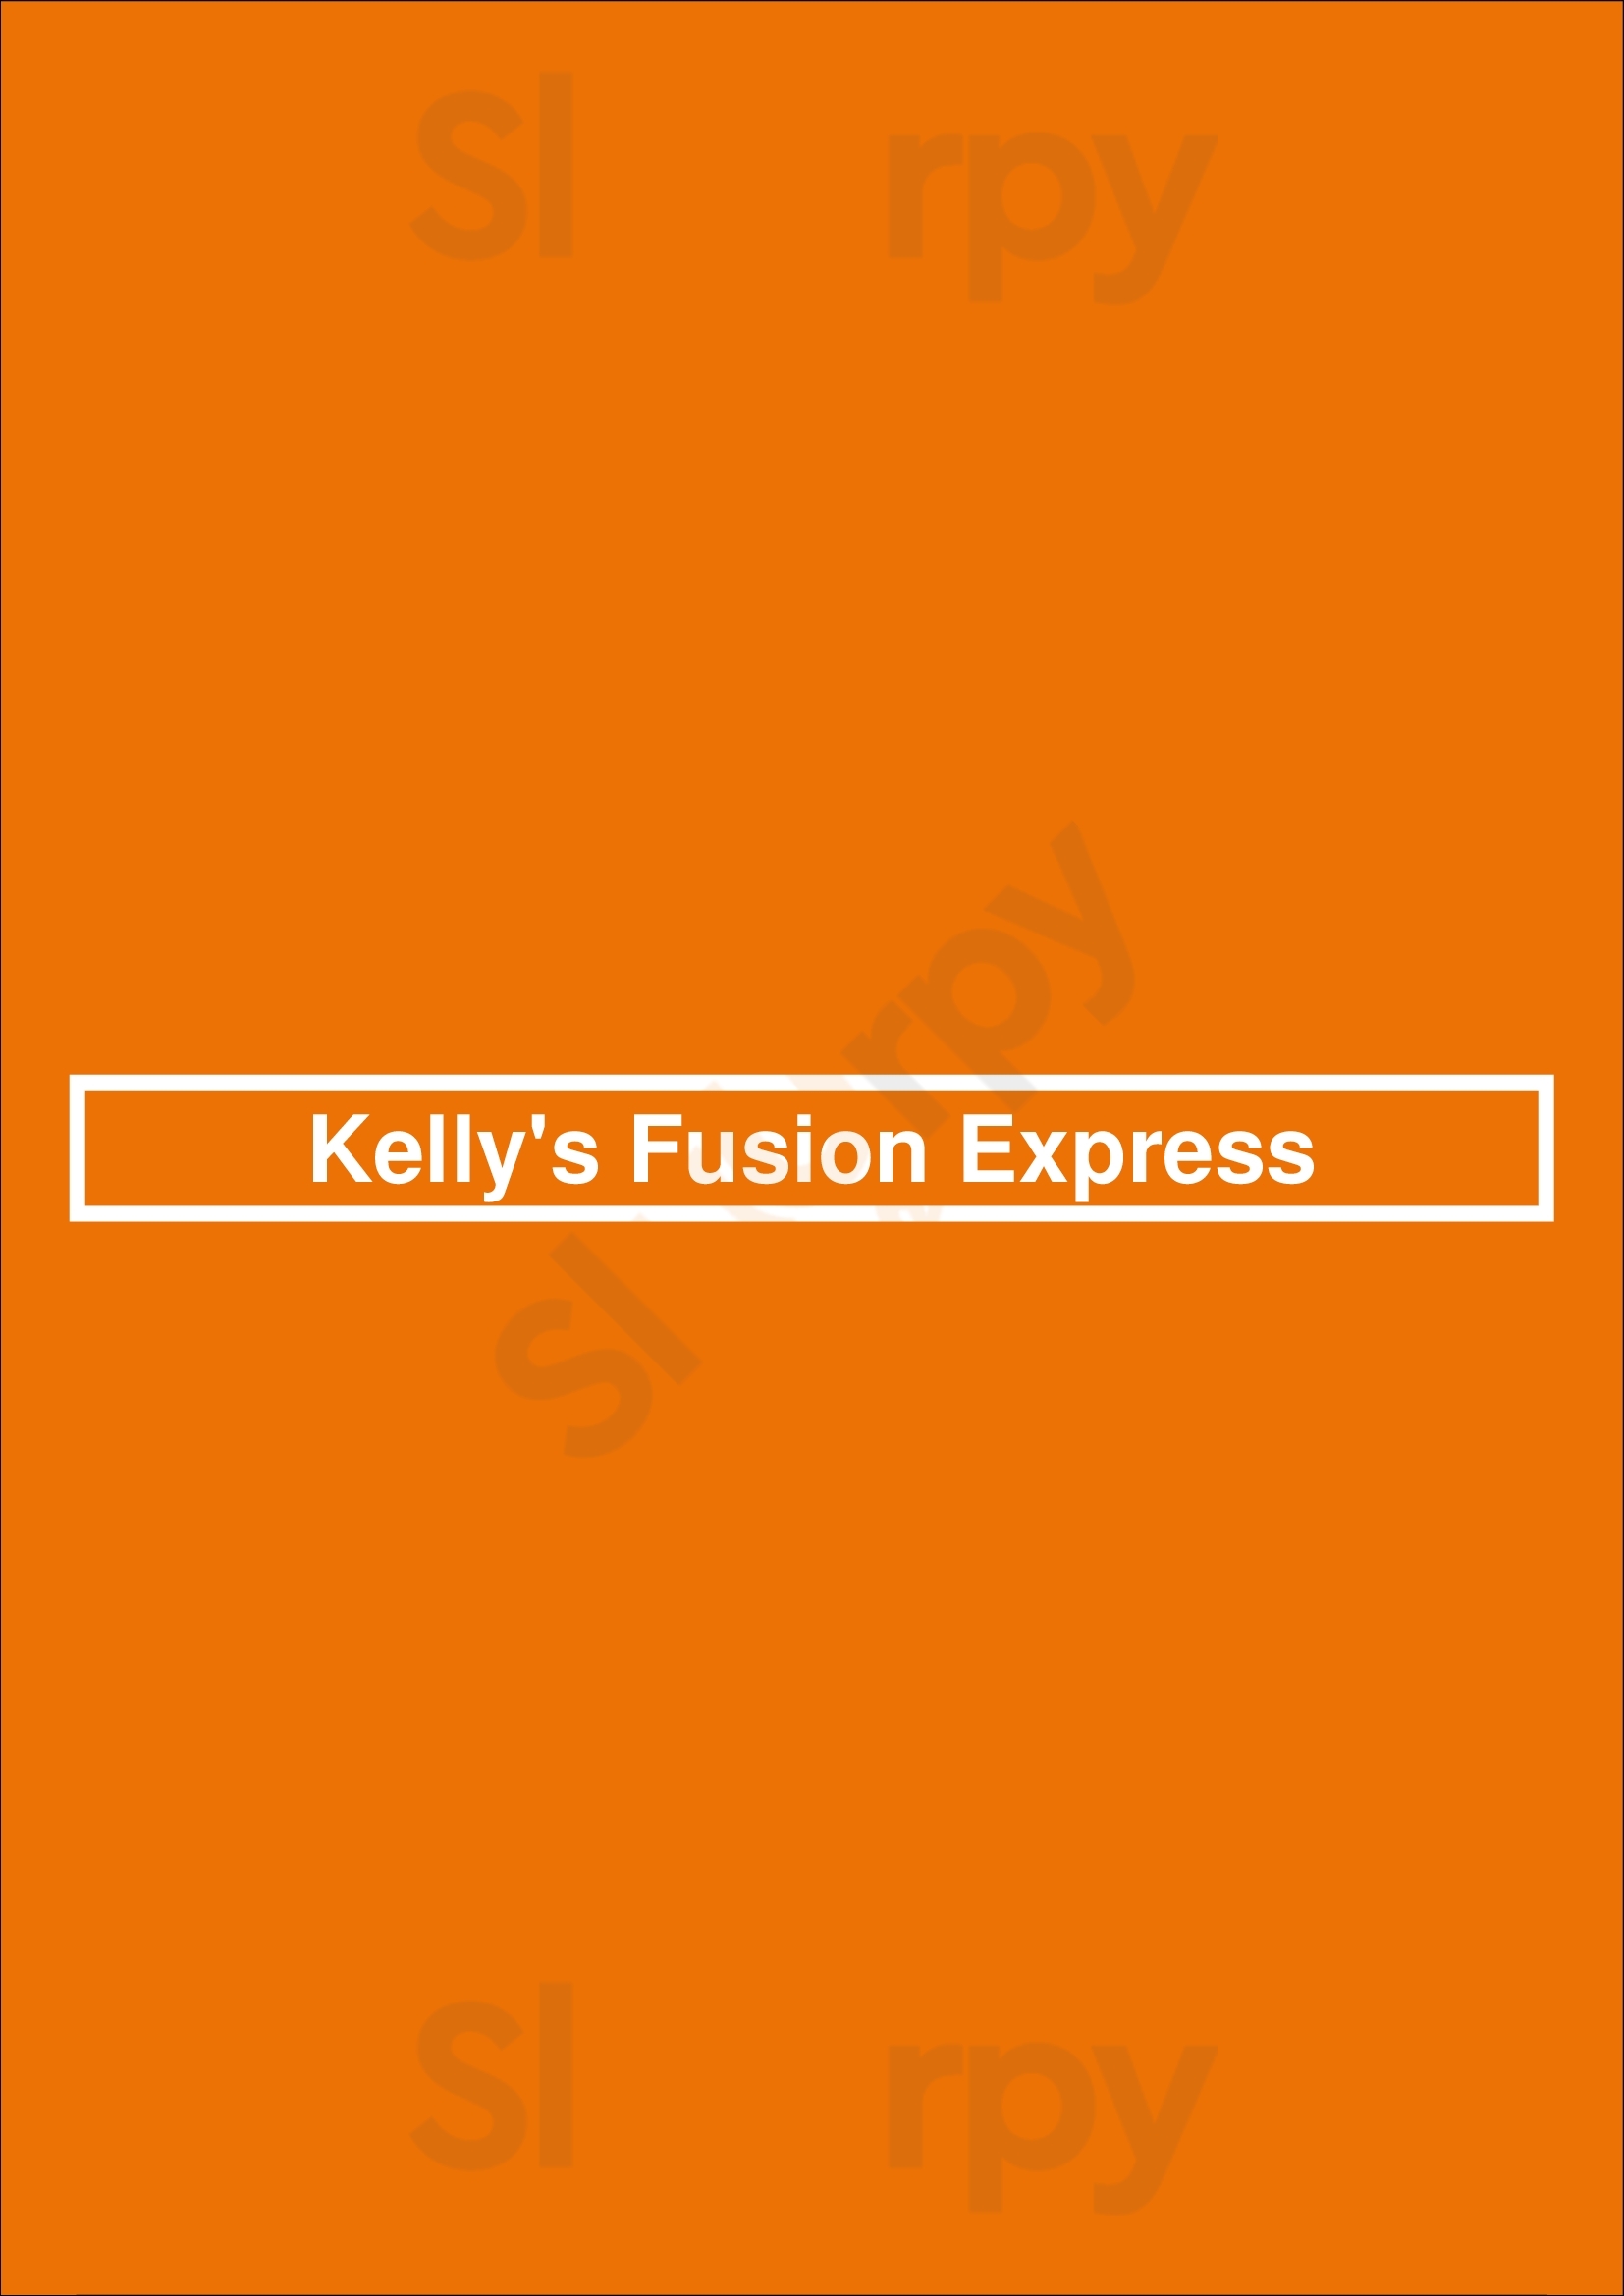 Kelly's Fusion Express Conyers Menu - 1